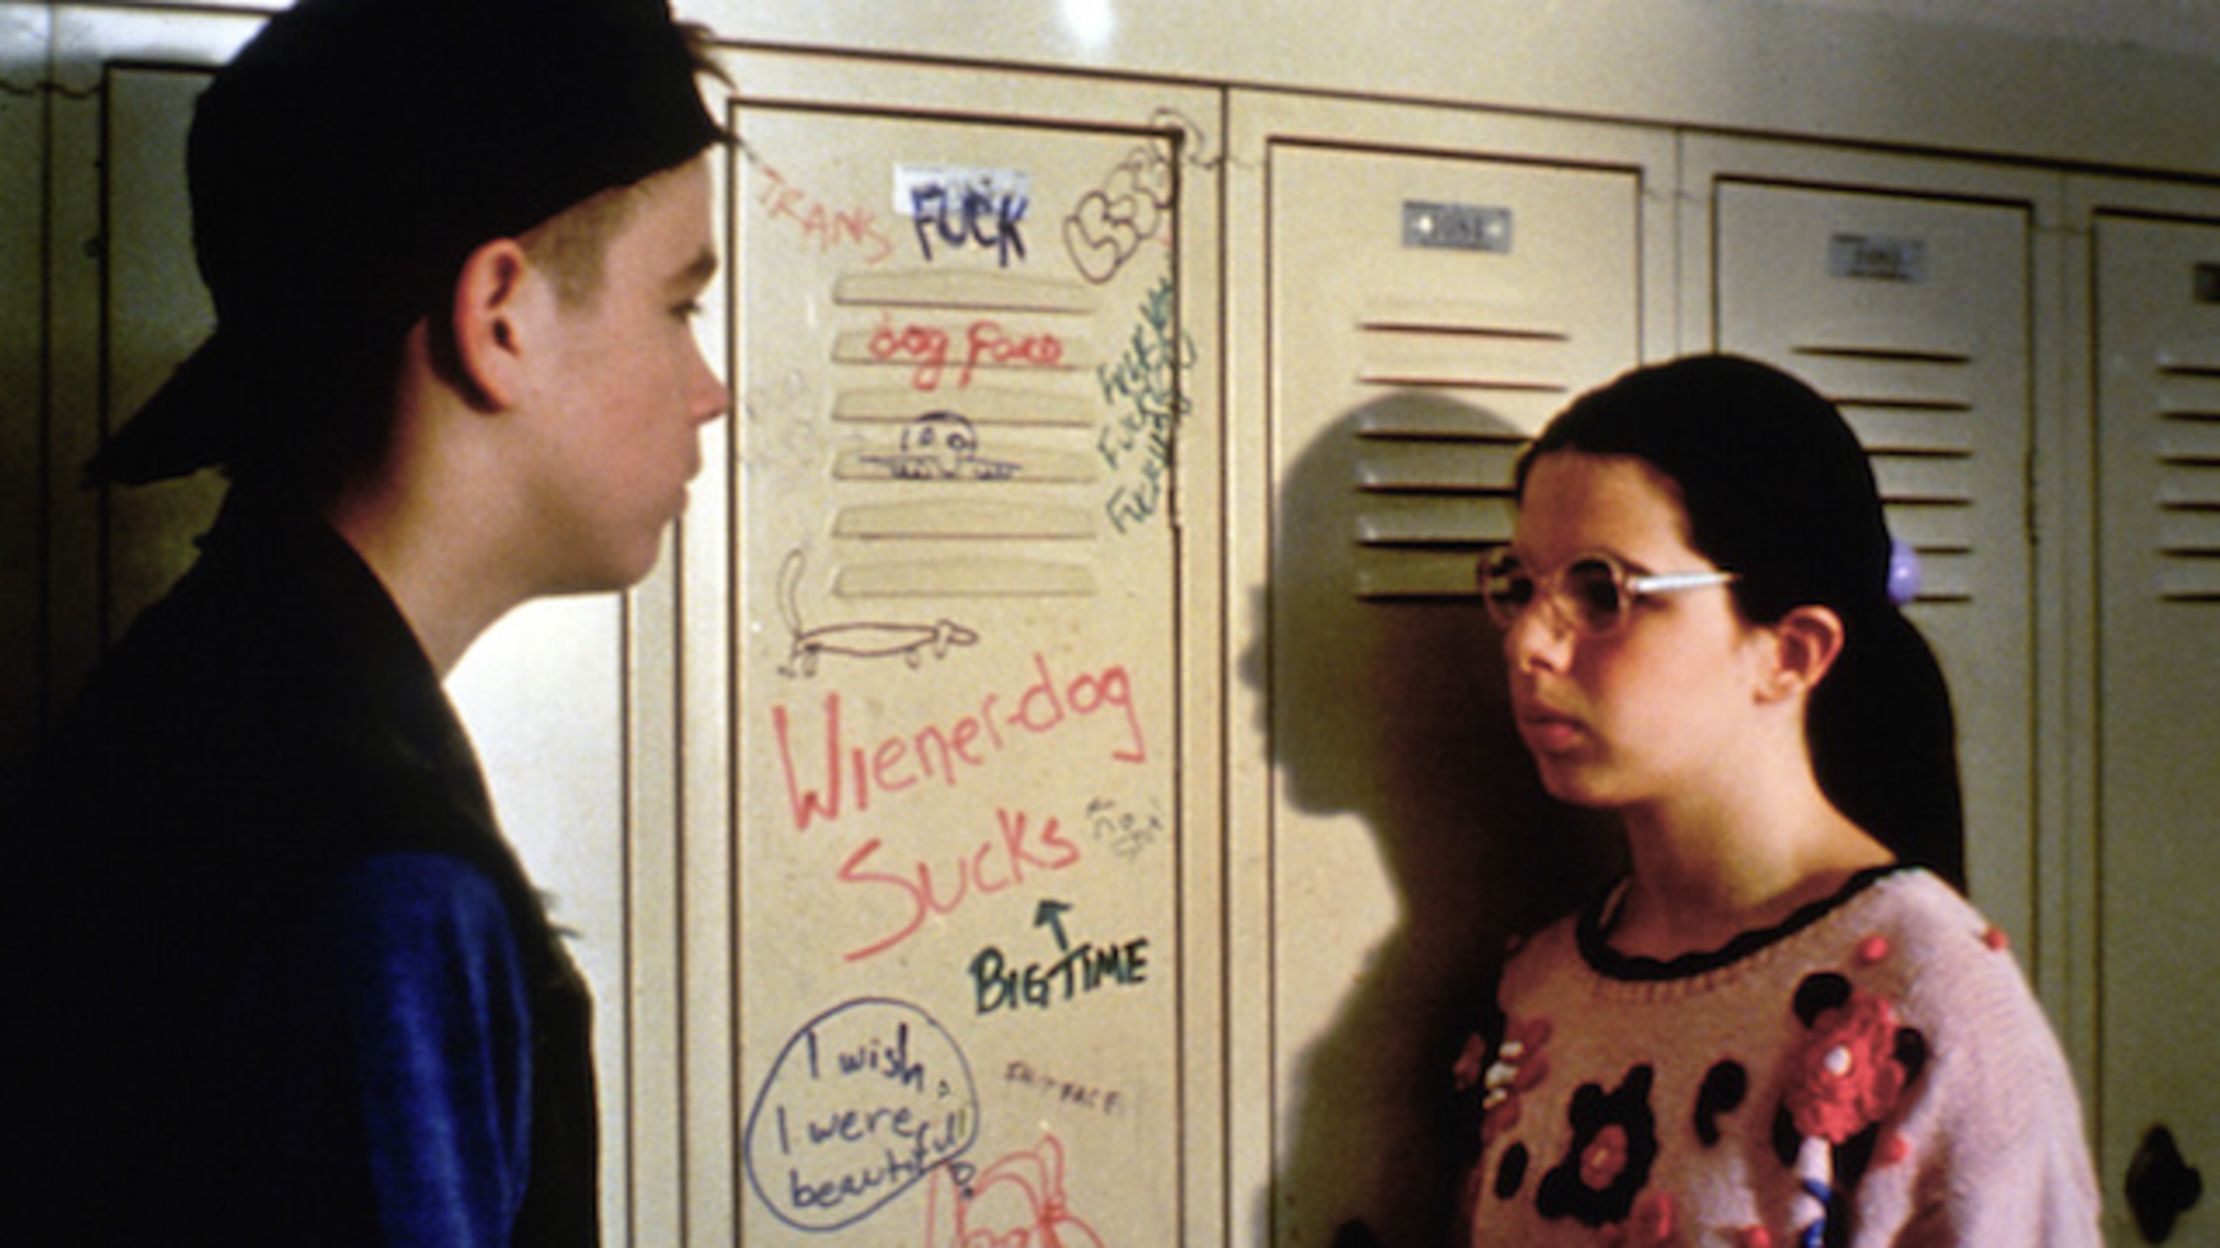 Brand & Dawn talk in front of her locker at school which is vandalized with graffiti that says Weiner-Dog Sucks in Welcome to the Dollhouse.